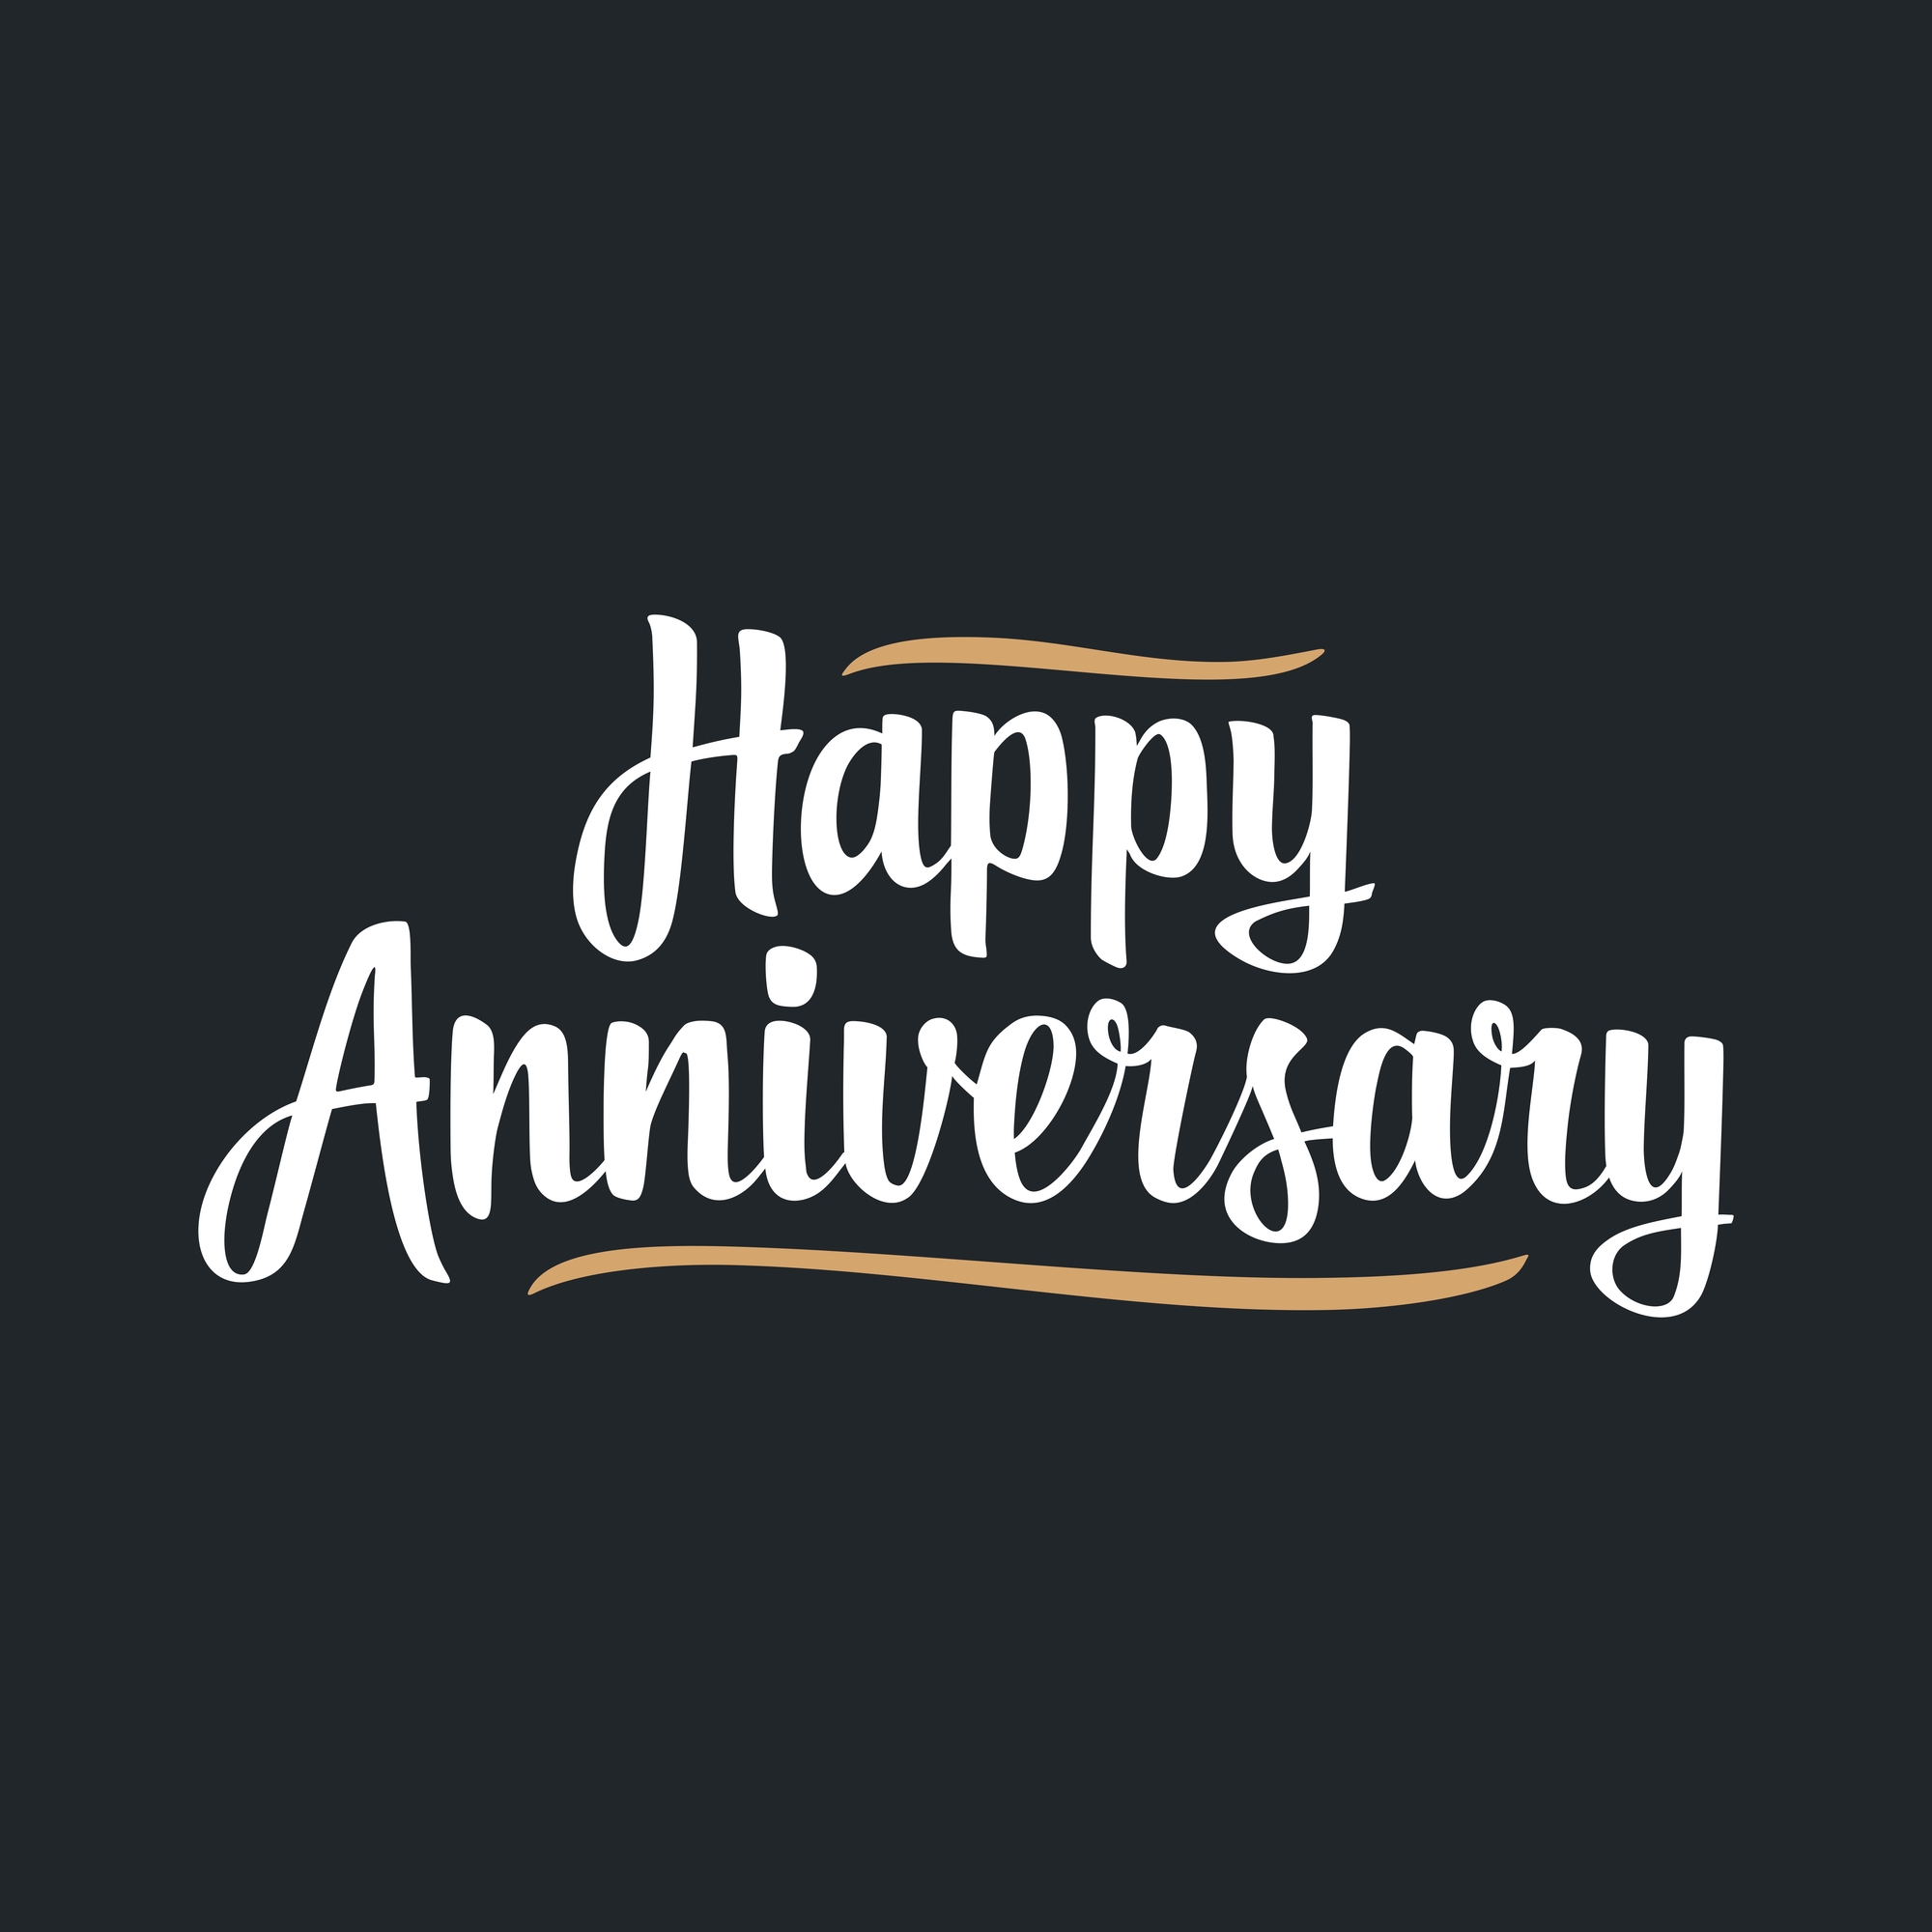 This Week We Are Celebrating GillAgency’s Anniversary